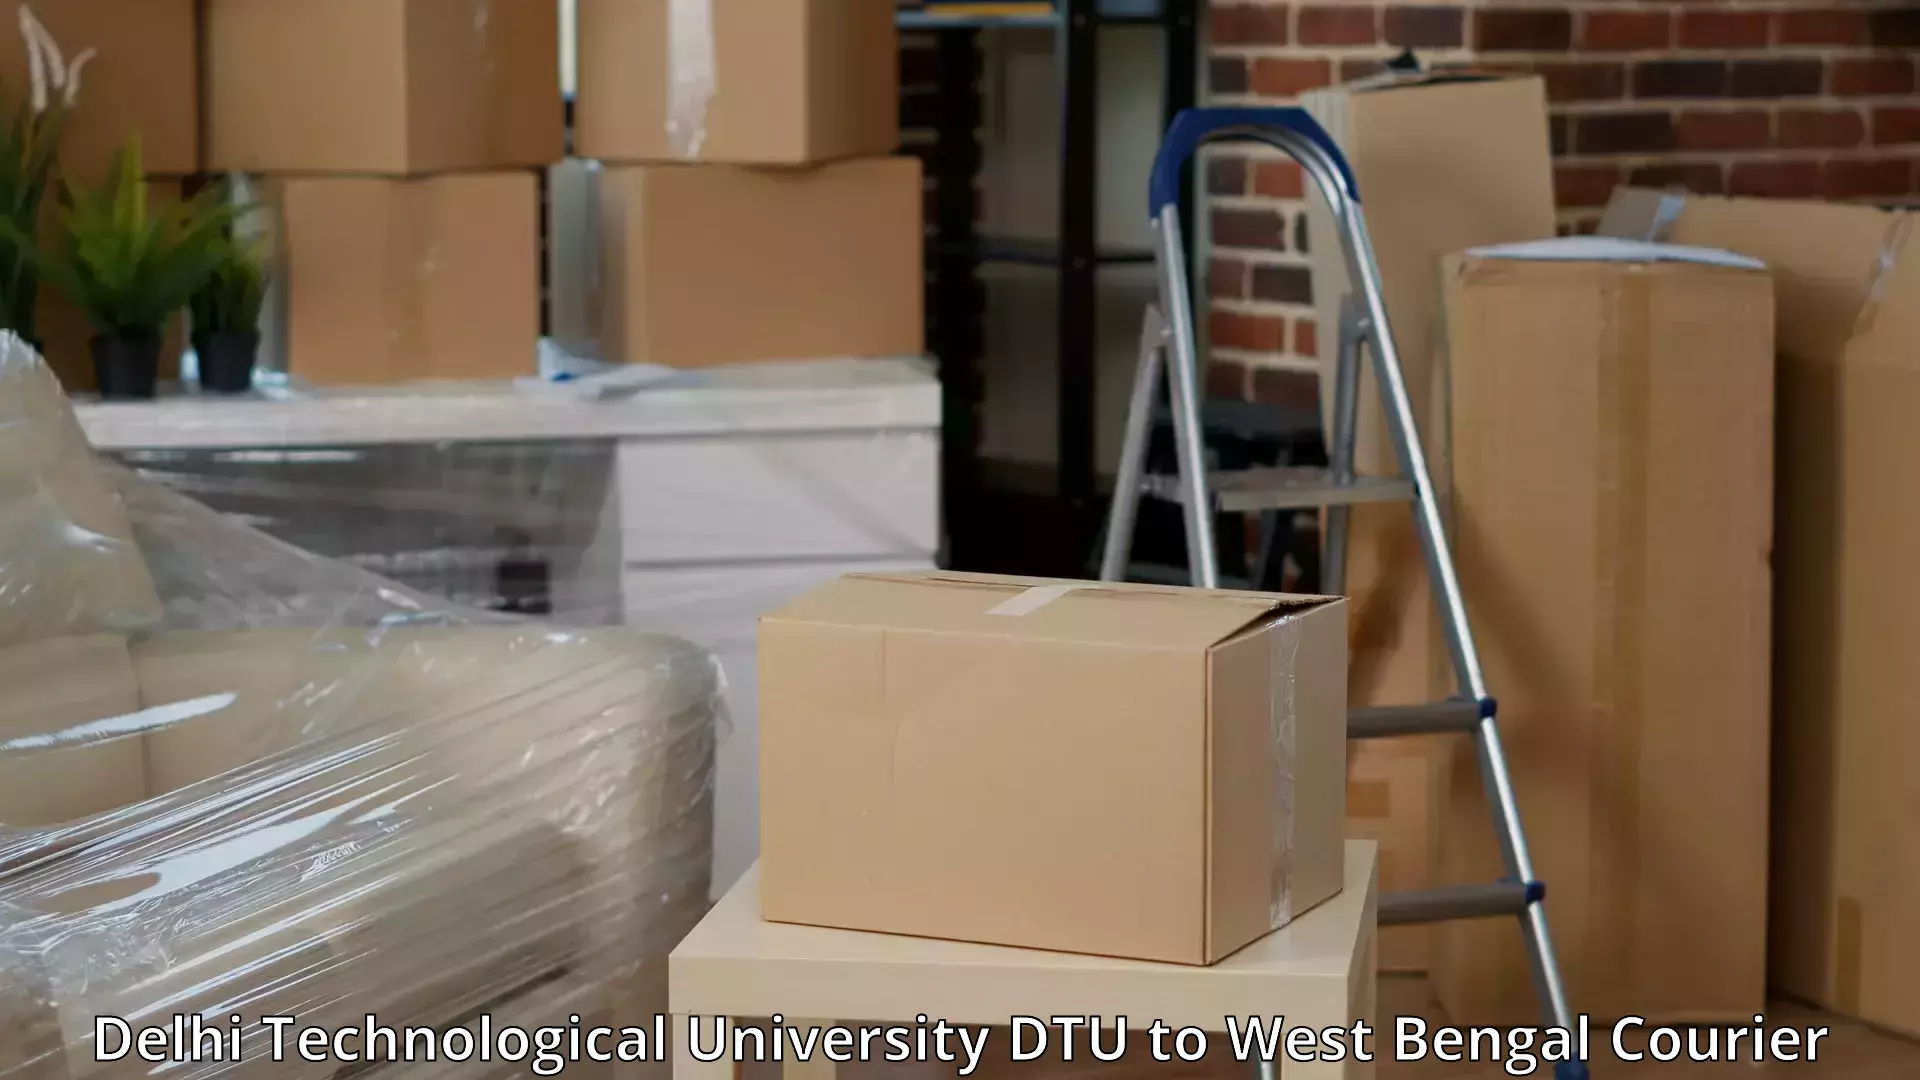 Professional home movers Delhi Technological University DTU to West Bengal